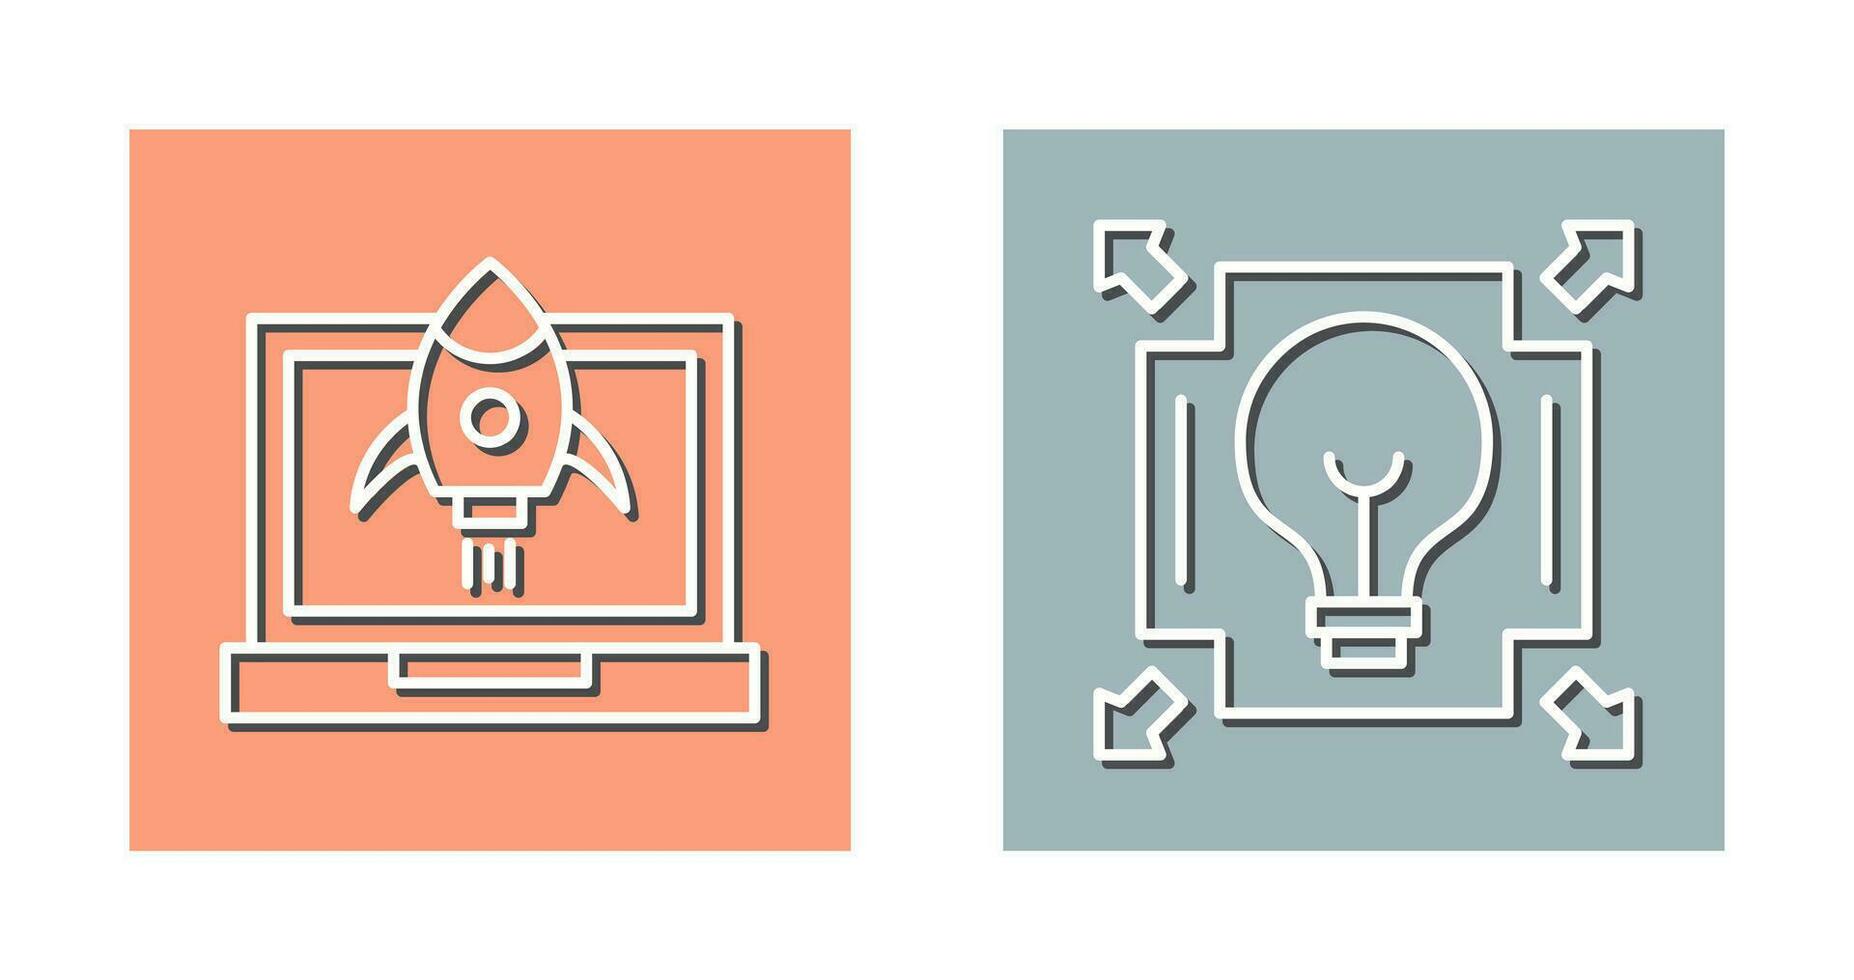 Startup and Diffusion Icon vector